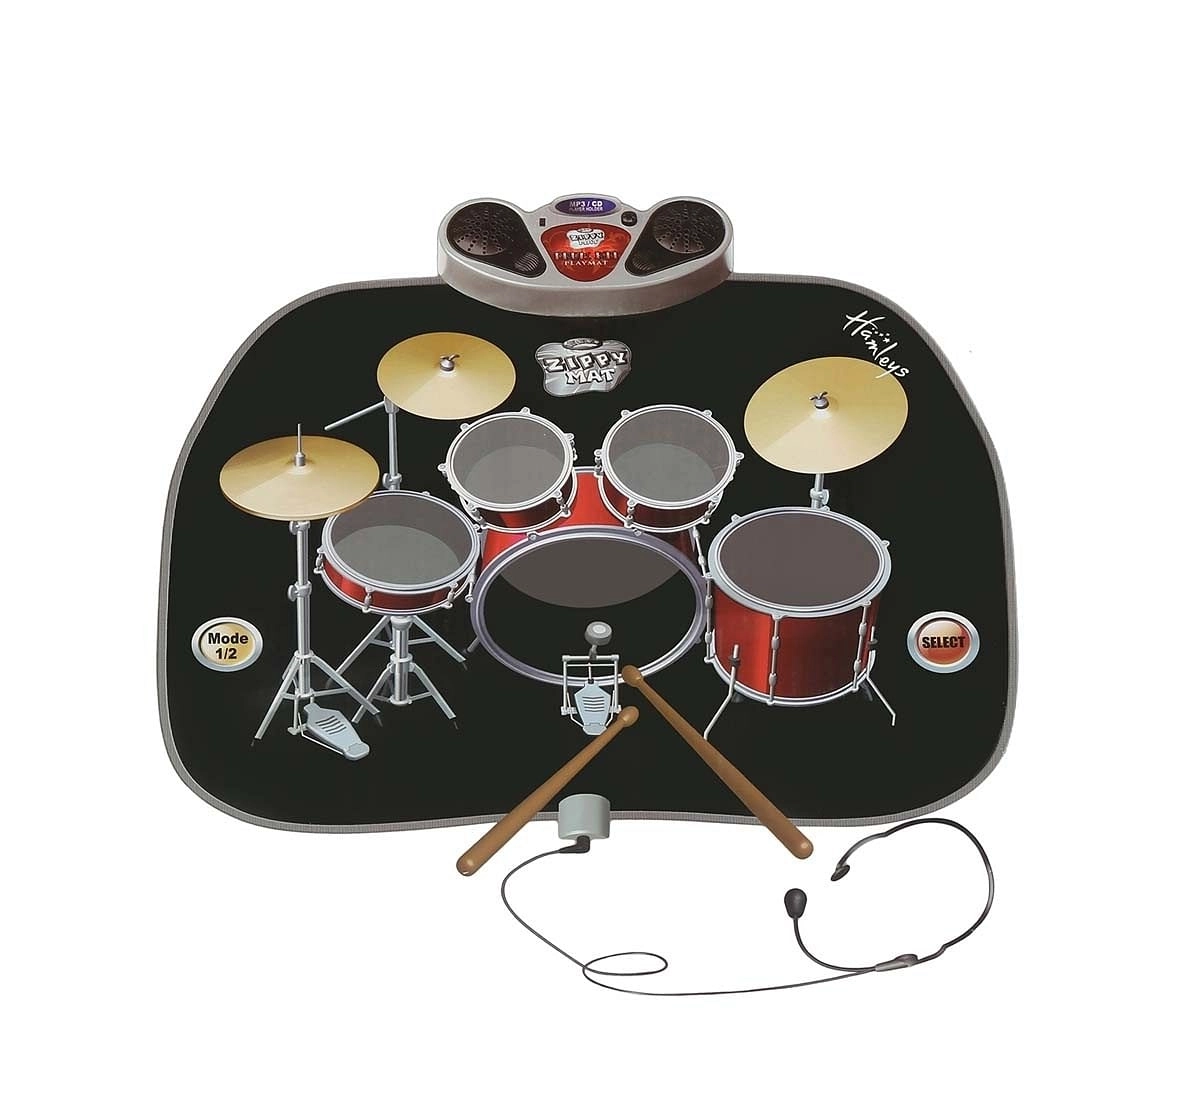 Hey Music Hamleys Drum Kit Play Mat Musical Toys for Kids age 3Y+ 